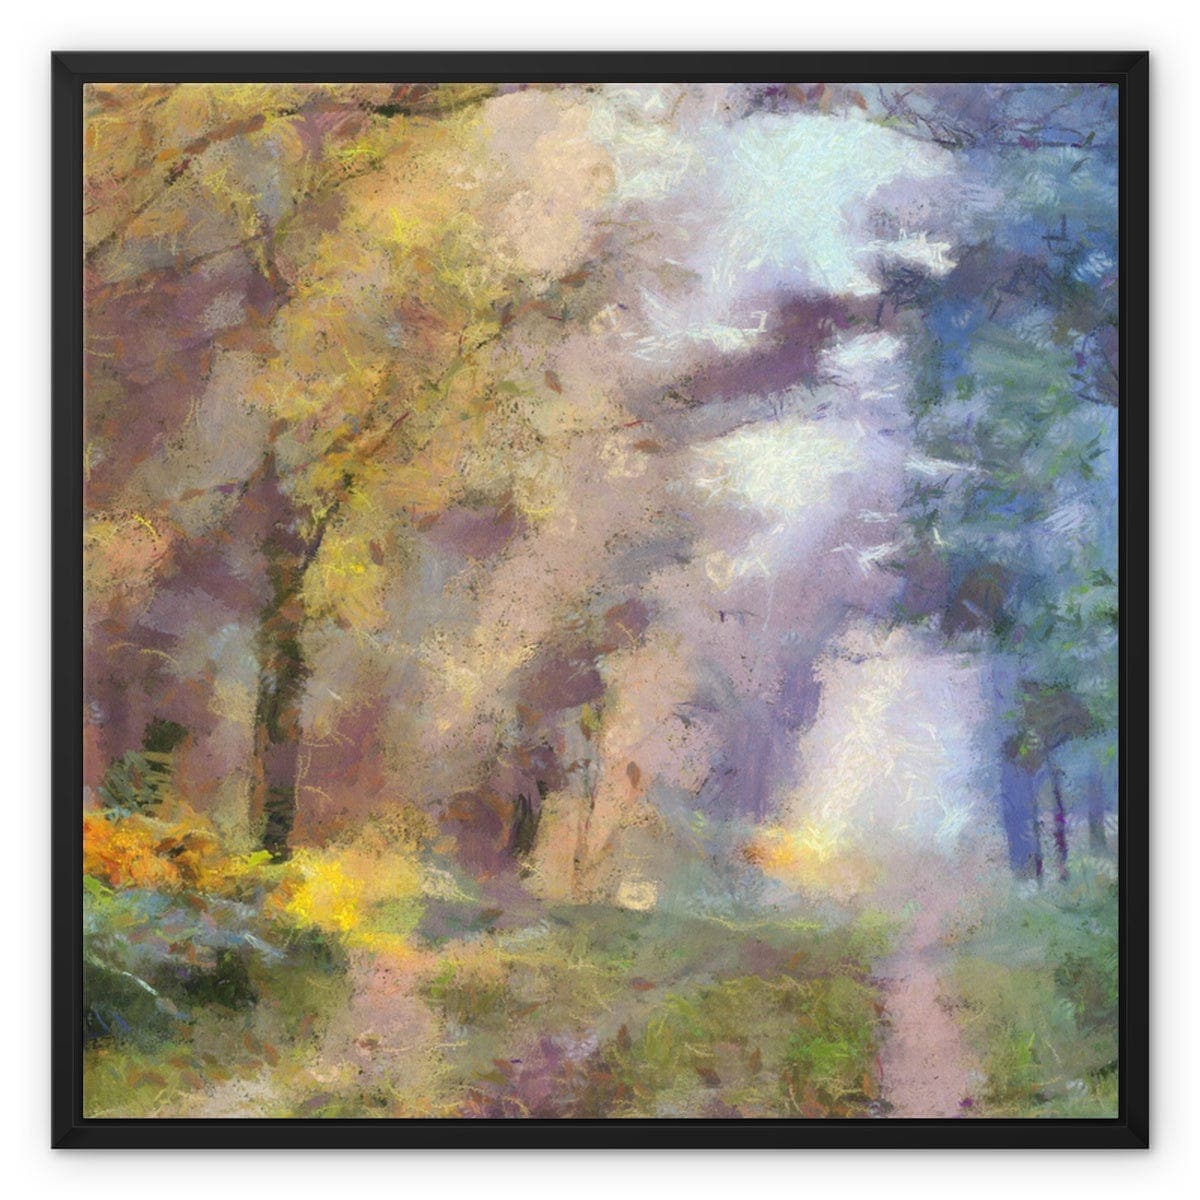 Early Morning Strole in the Woods Framed Canvas